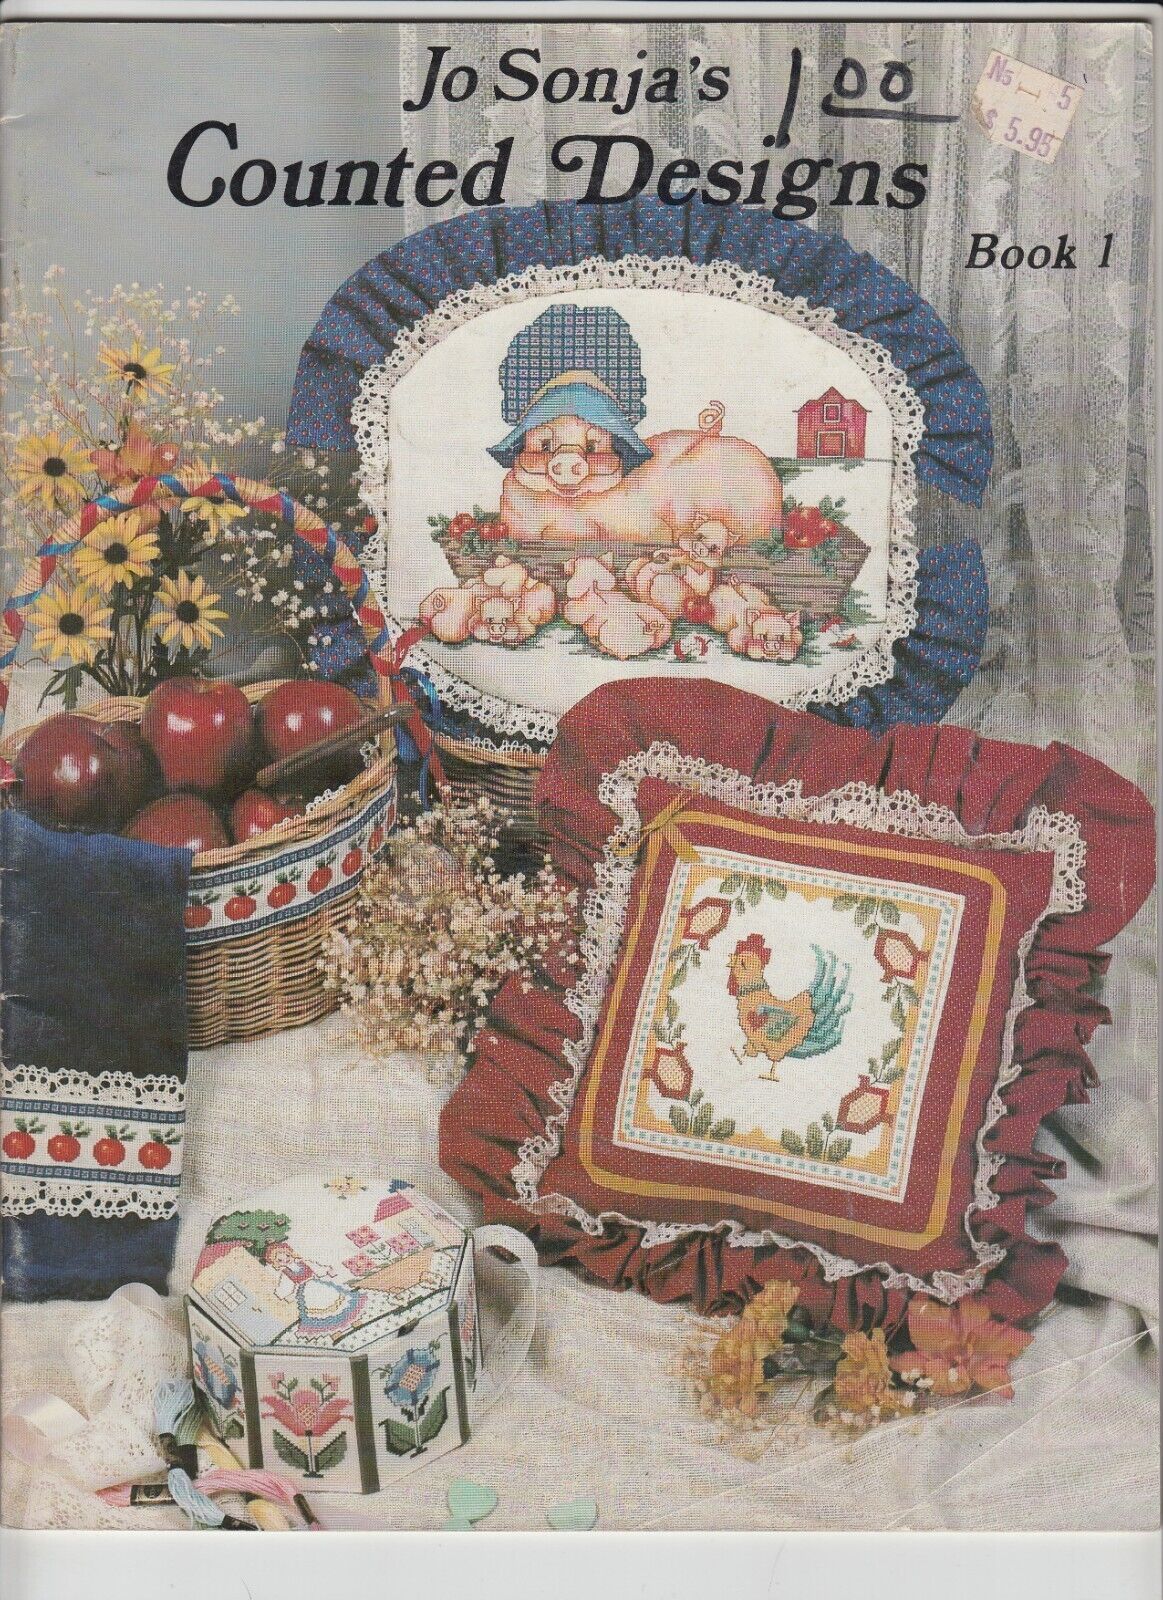 Jo Sonja's Counted Design s Cross Stitch Pattern Book 1 Country Farm Animal Pig - $6.89